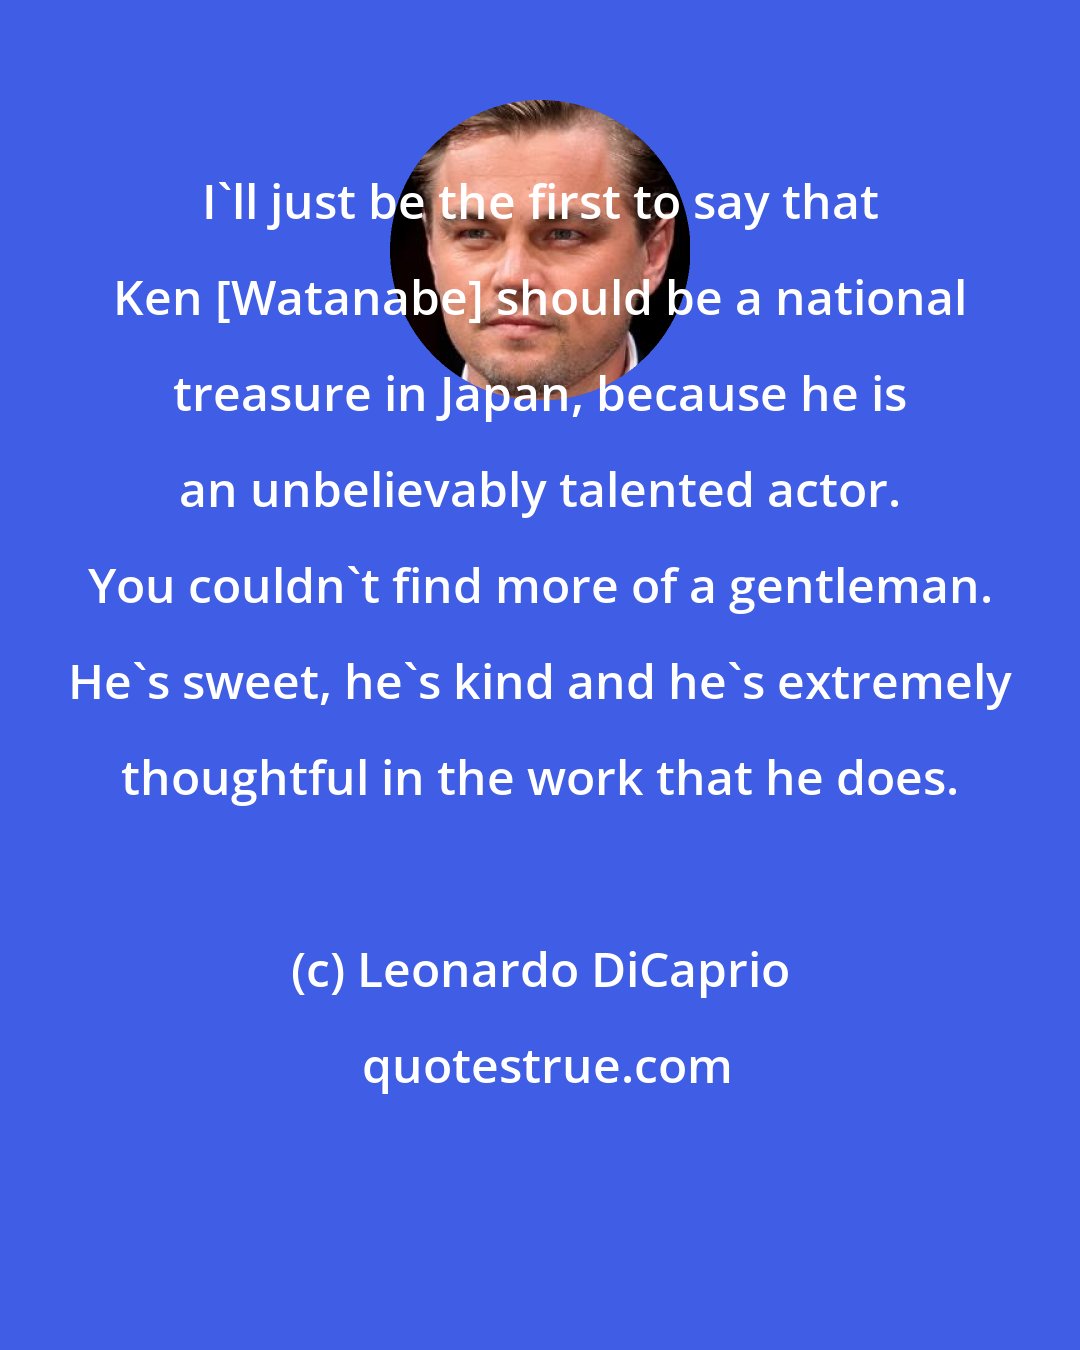 Leonardo DiCaprio: I'll just be the first to say that Ken [Watanabe] should be a national treasure in Japan, because he is an unbelievably talented actor. You couldn't find more of a gentleman. He's sweet, he's kind and he's extremely thoughtful in the work that he does.